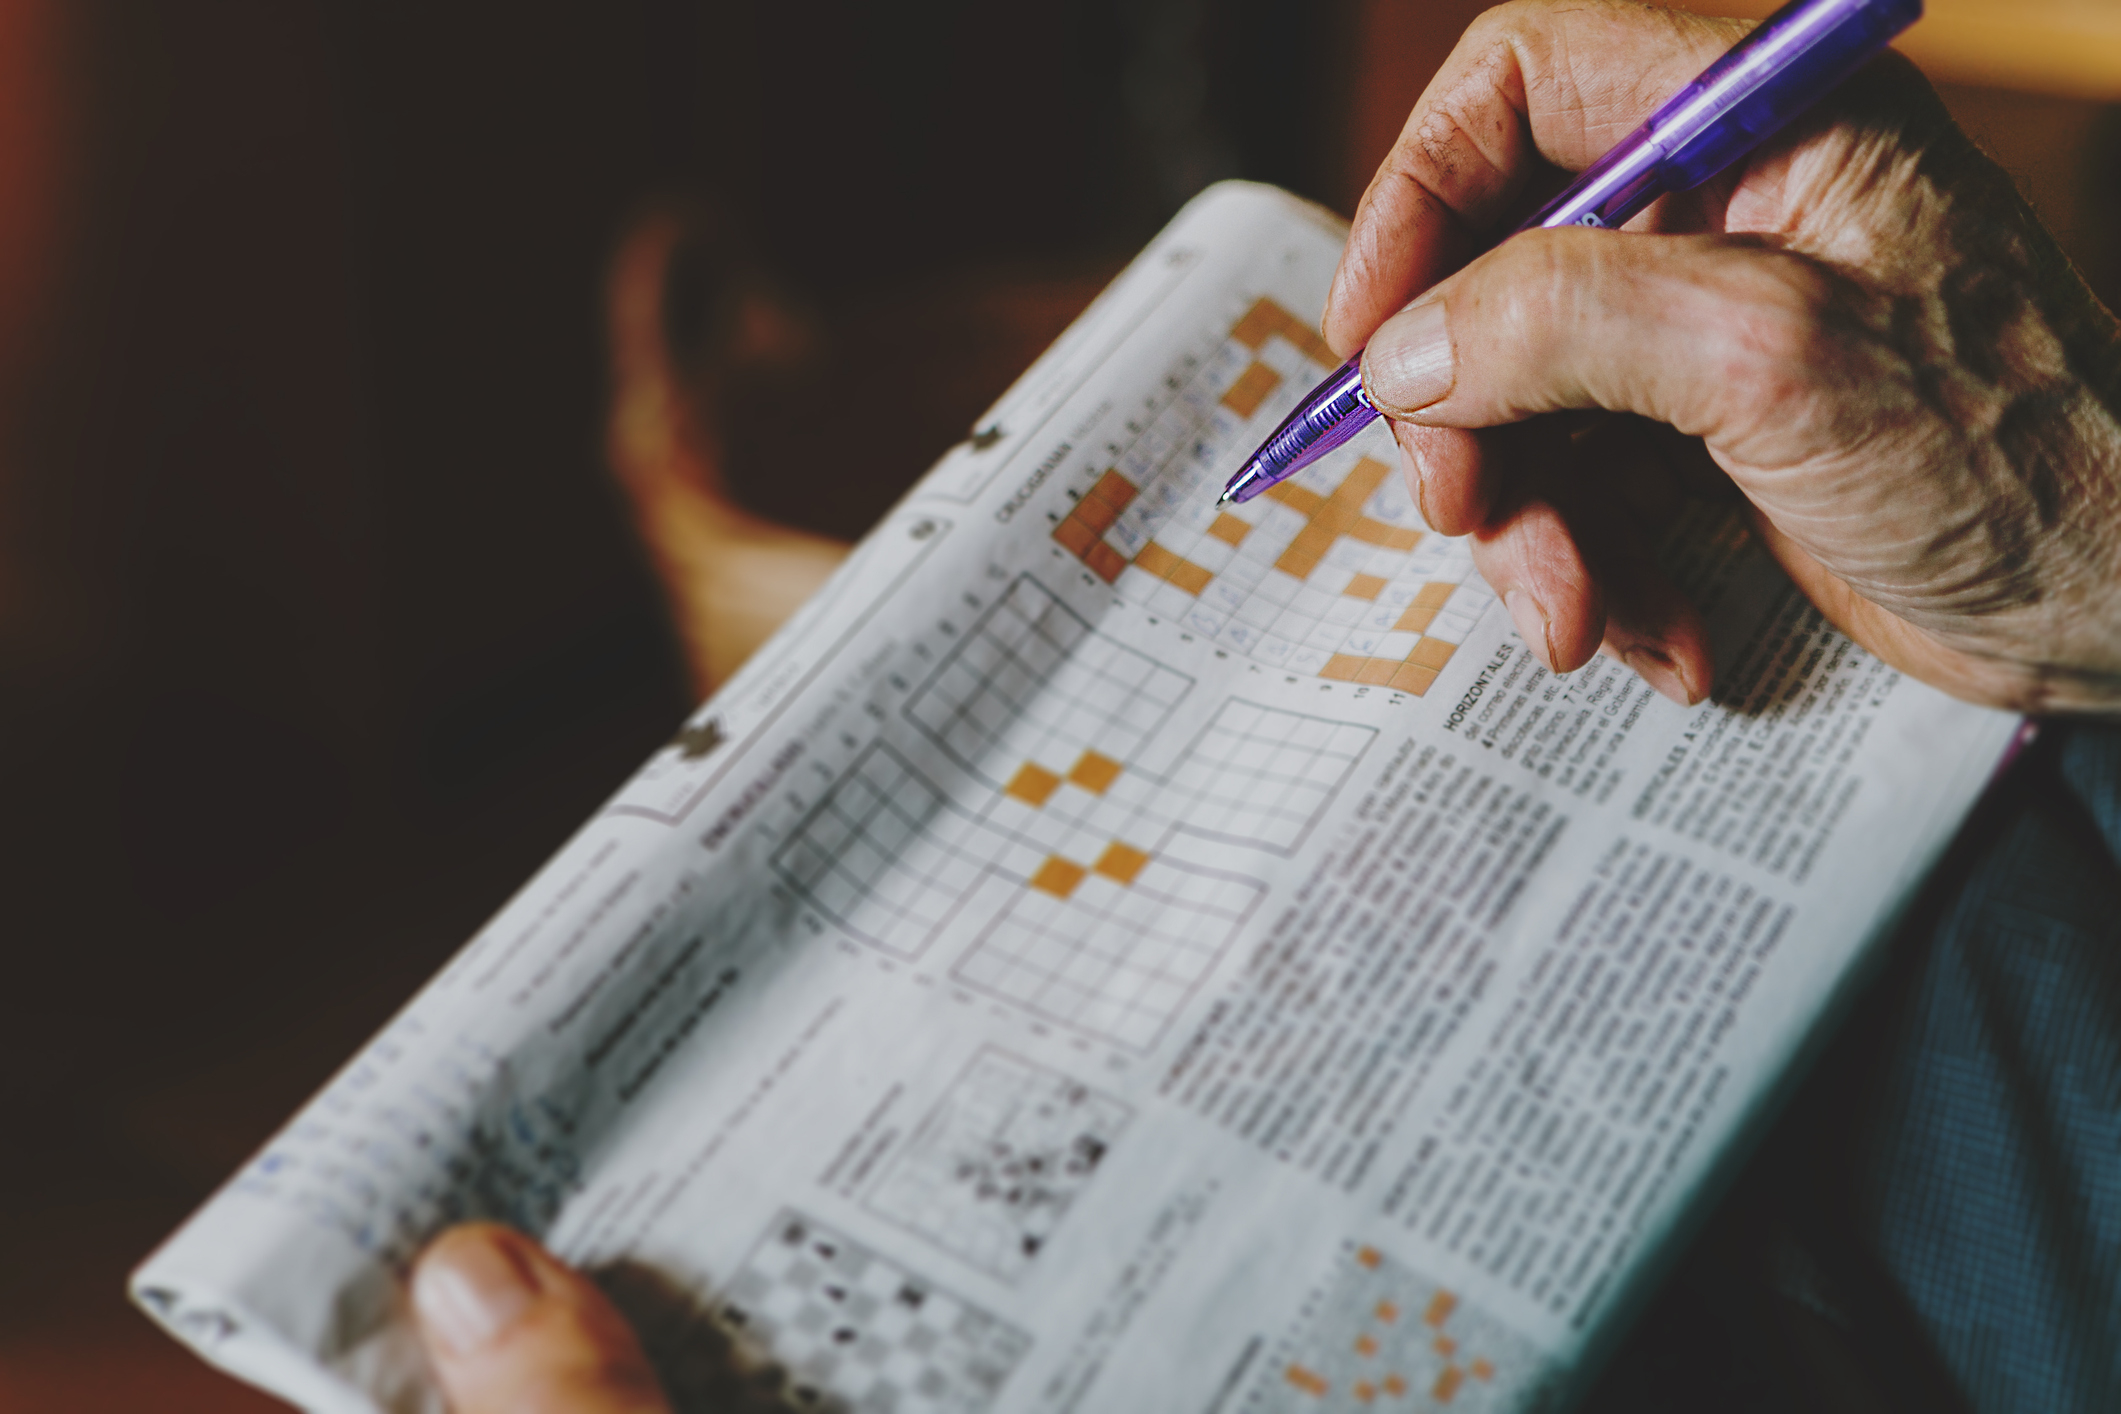 A person is completing a crossword puzzle in a newspaper